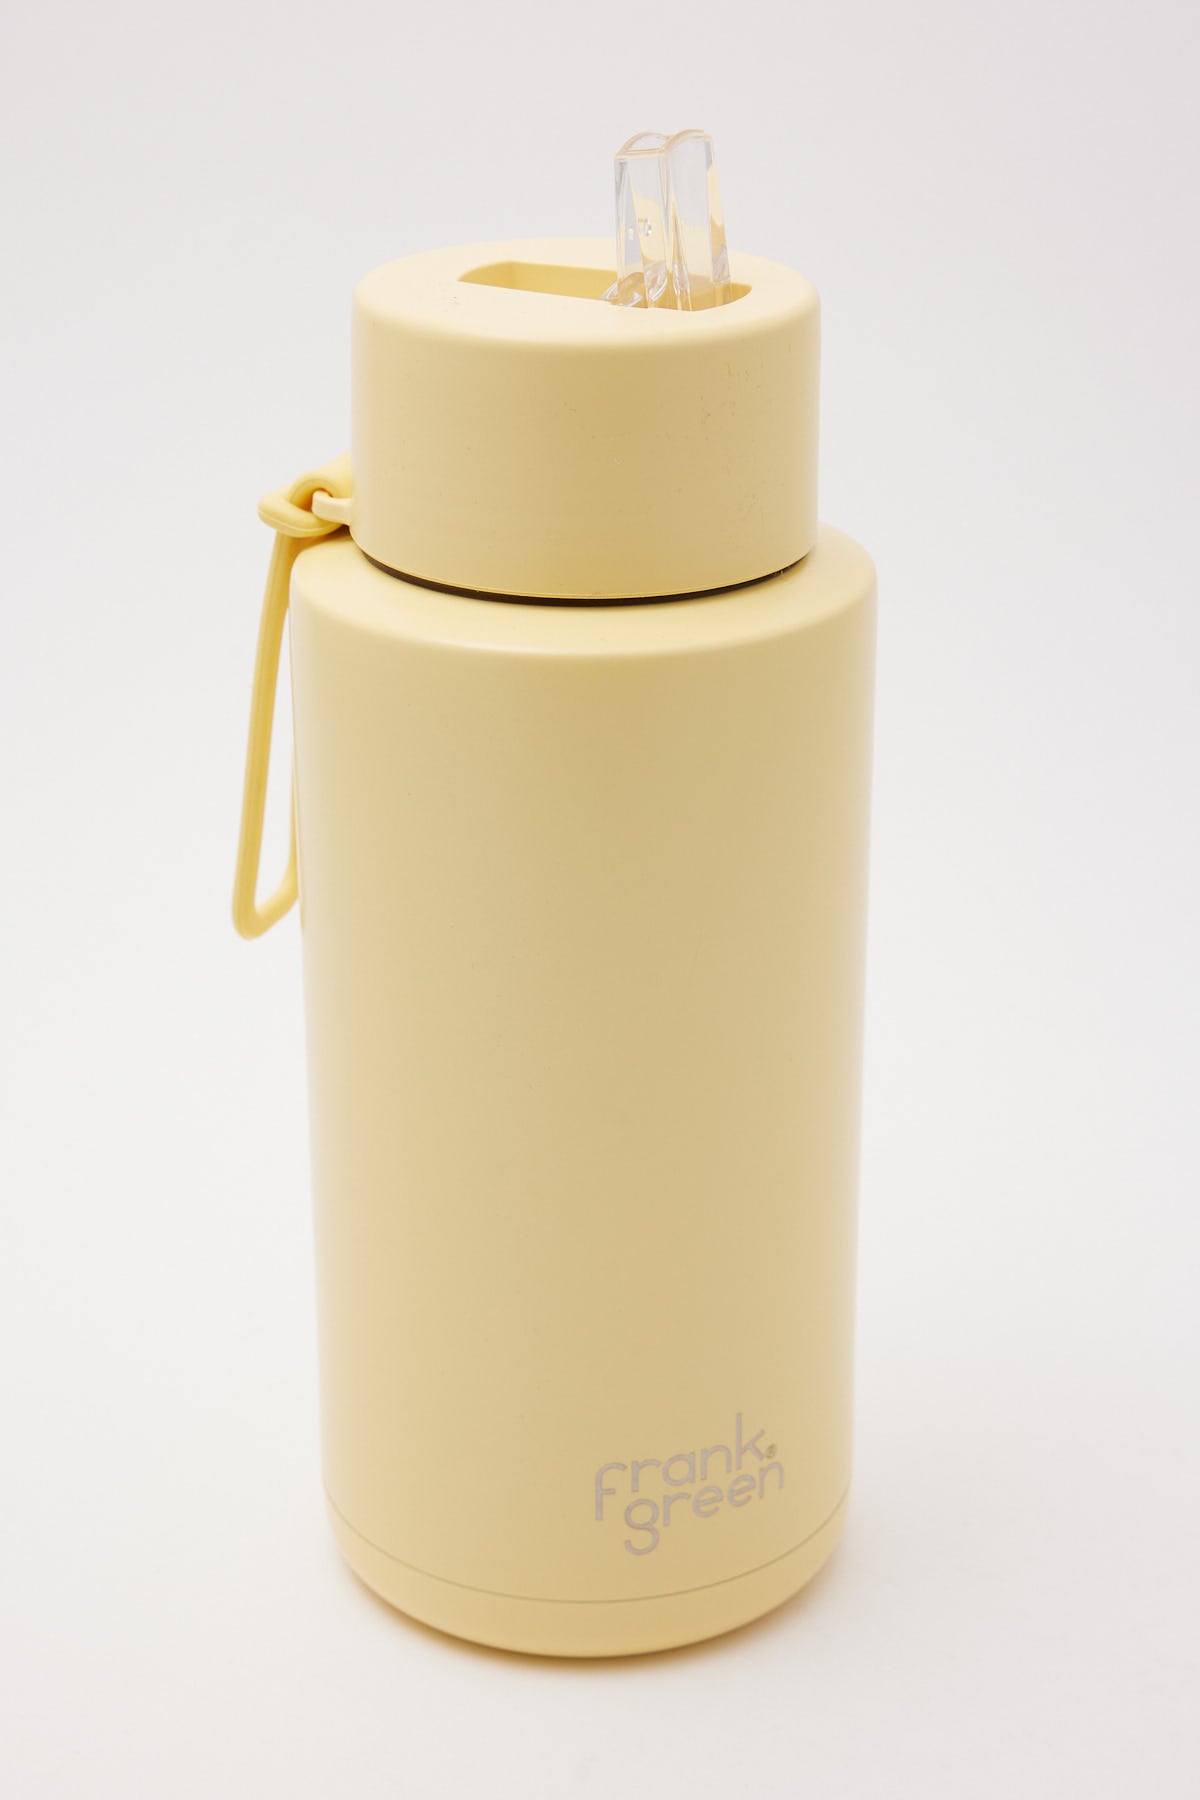 Frank Green 34oz Reusable Bottle with Straw Lid Buttermilk